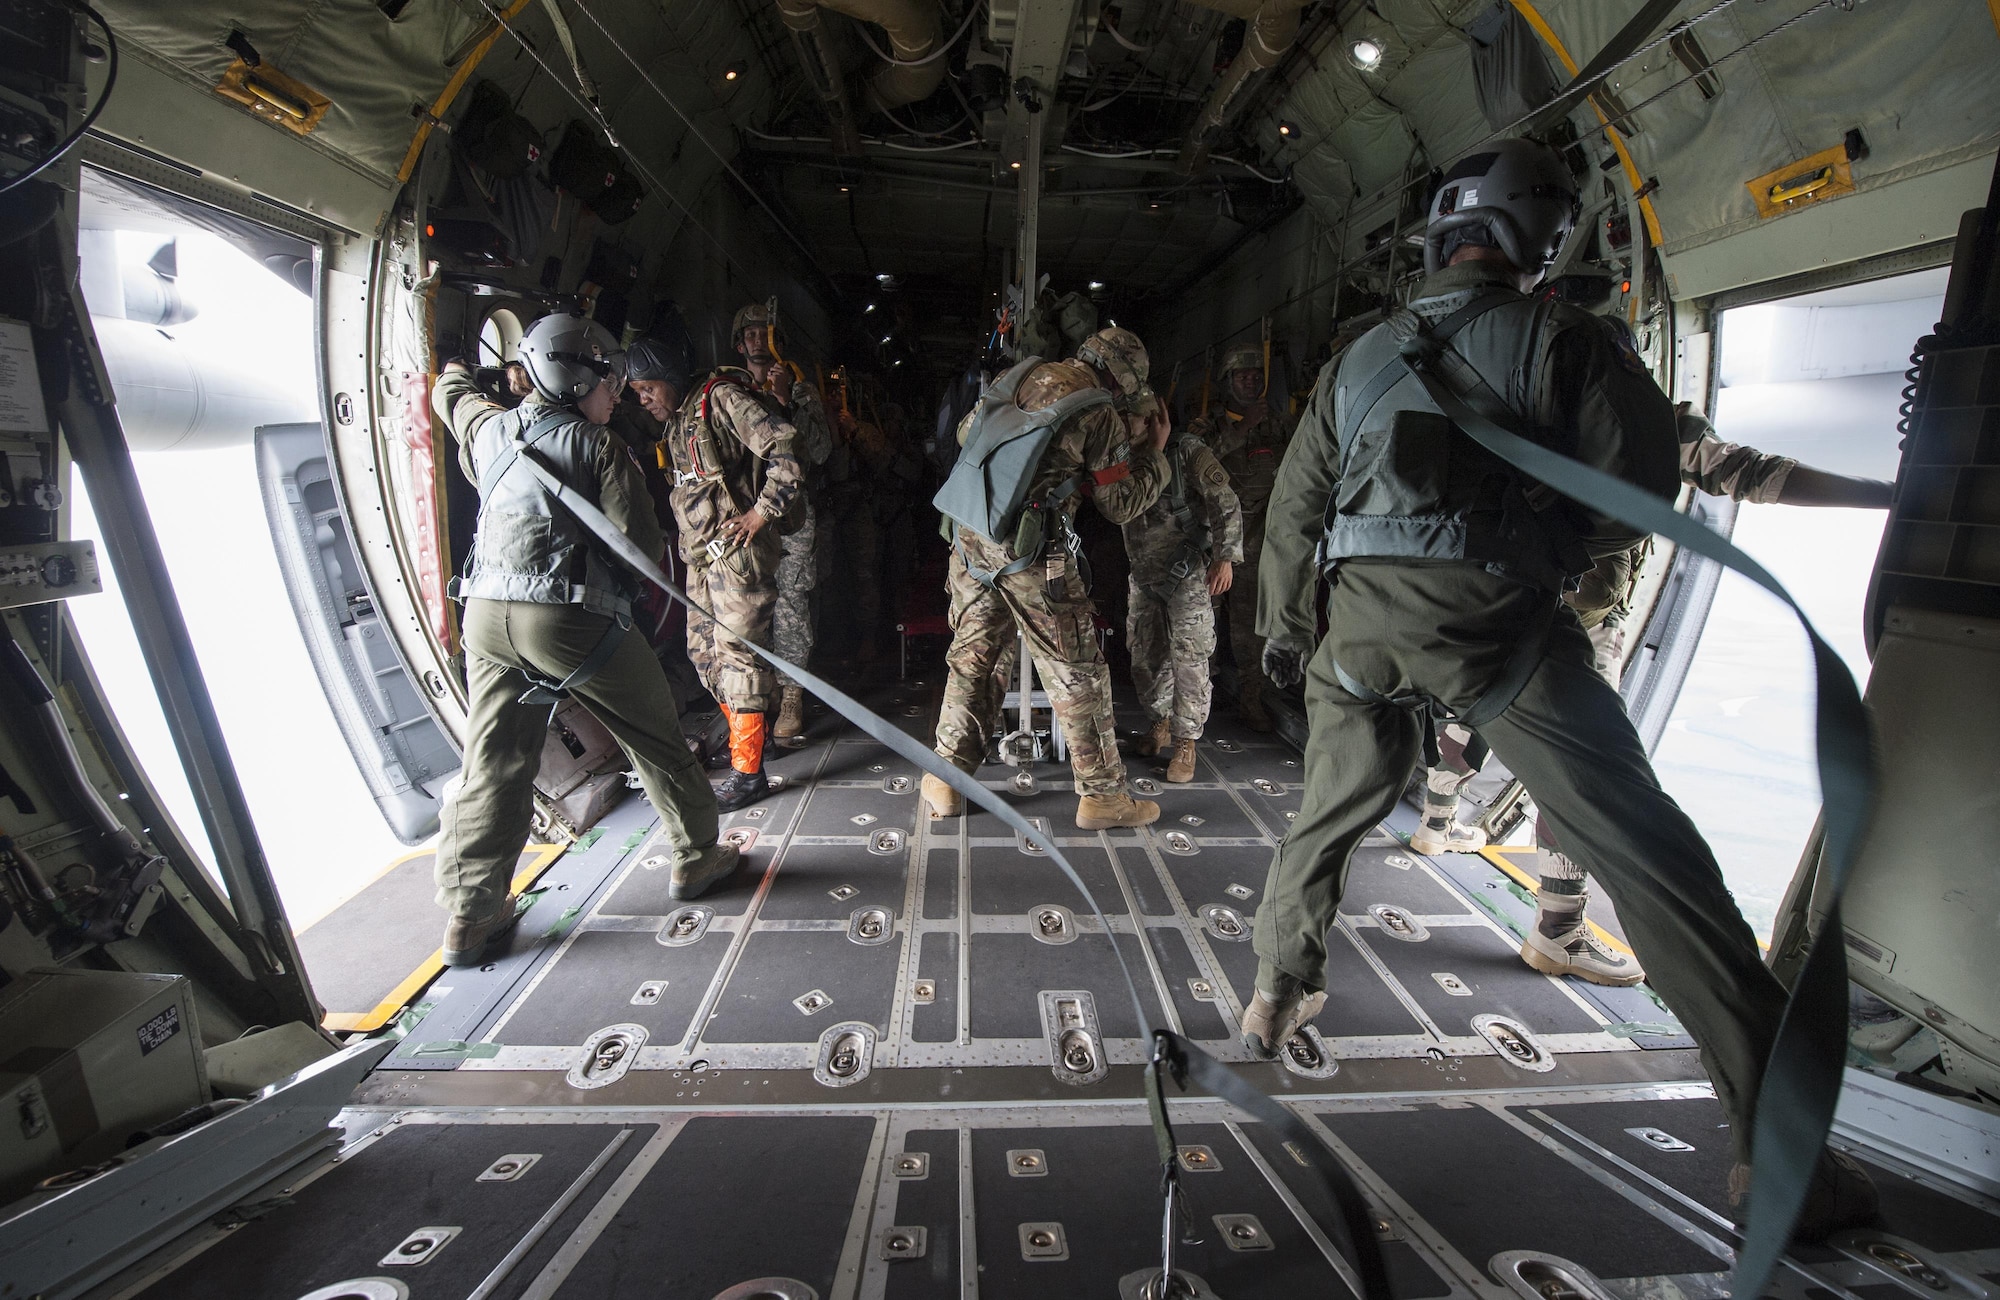 Paratroopers, with the U.S. Army’s 82nd Airborne Division, prepare to jump from a C-130 Hercules while Gabonese Defense Forces jumpmasters assist them with exiting the aircraft during exercise Central Accord 2016 in Libreville, Gabon, June 22, 2016. The U.S. Army Africa exercise is an annual, combined, joint military exercise that brings together partner nations to practice and demonstrate proficiency in conducting peacekeeping operations. (DOD photo/Tech. Sgt. Brian Kimball)